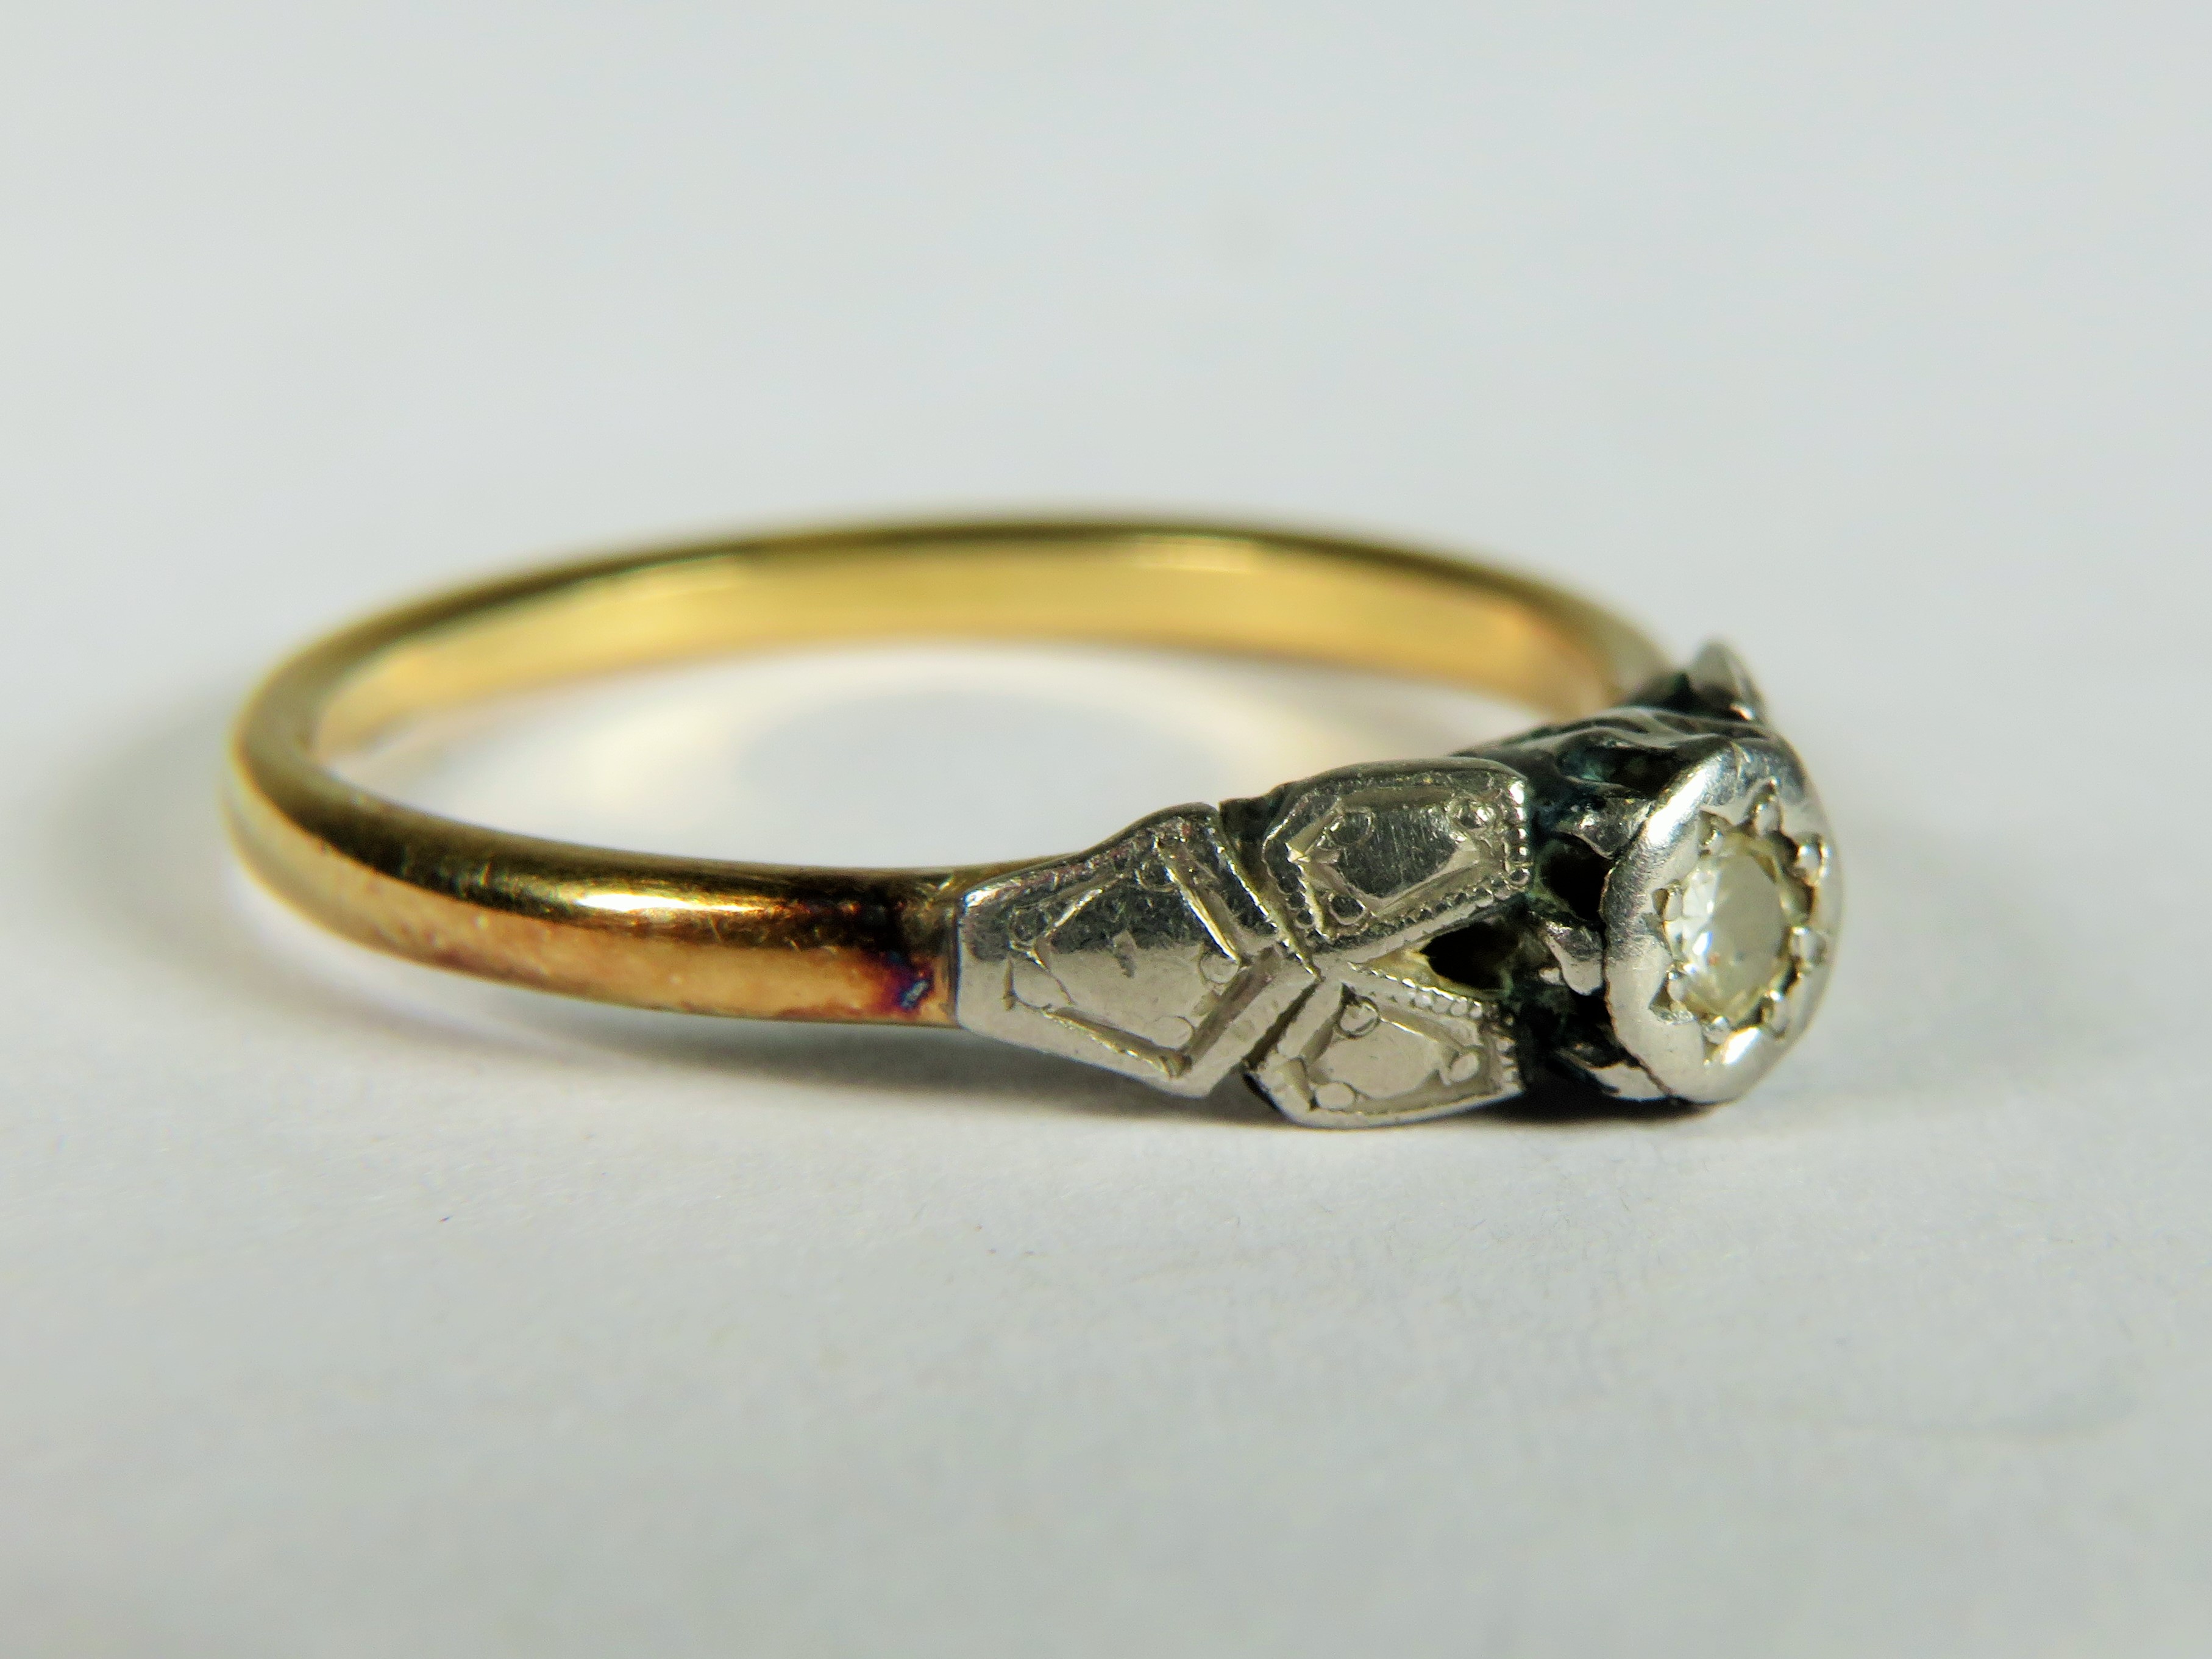 18ct Yellow Gold Ring set with an Illusion mounted Diamond.(2mm)   Finger size 'N'2.0g - Image 3 of 3